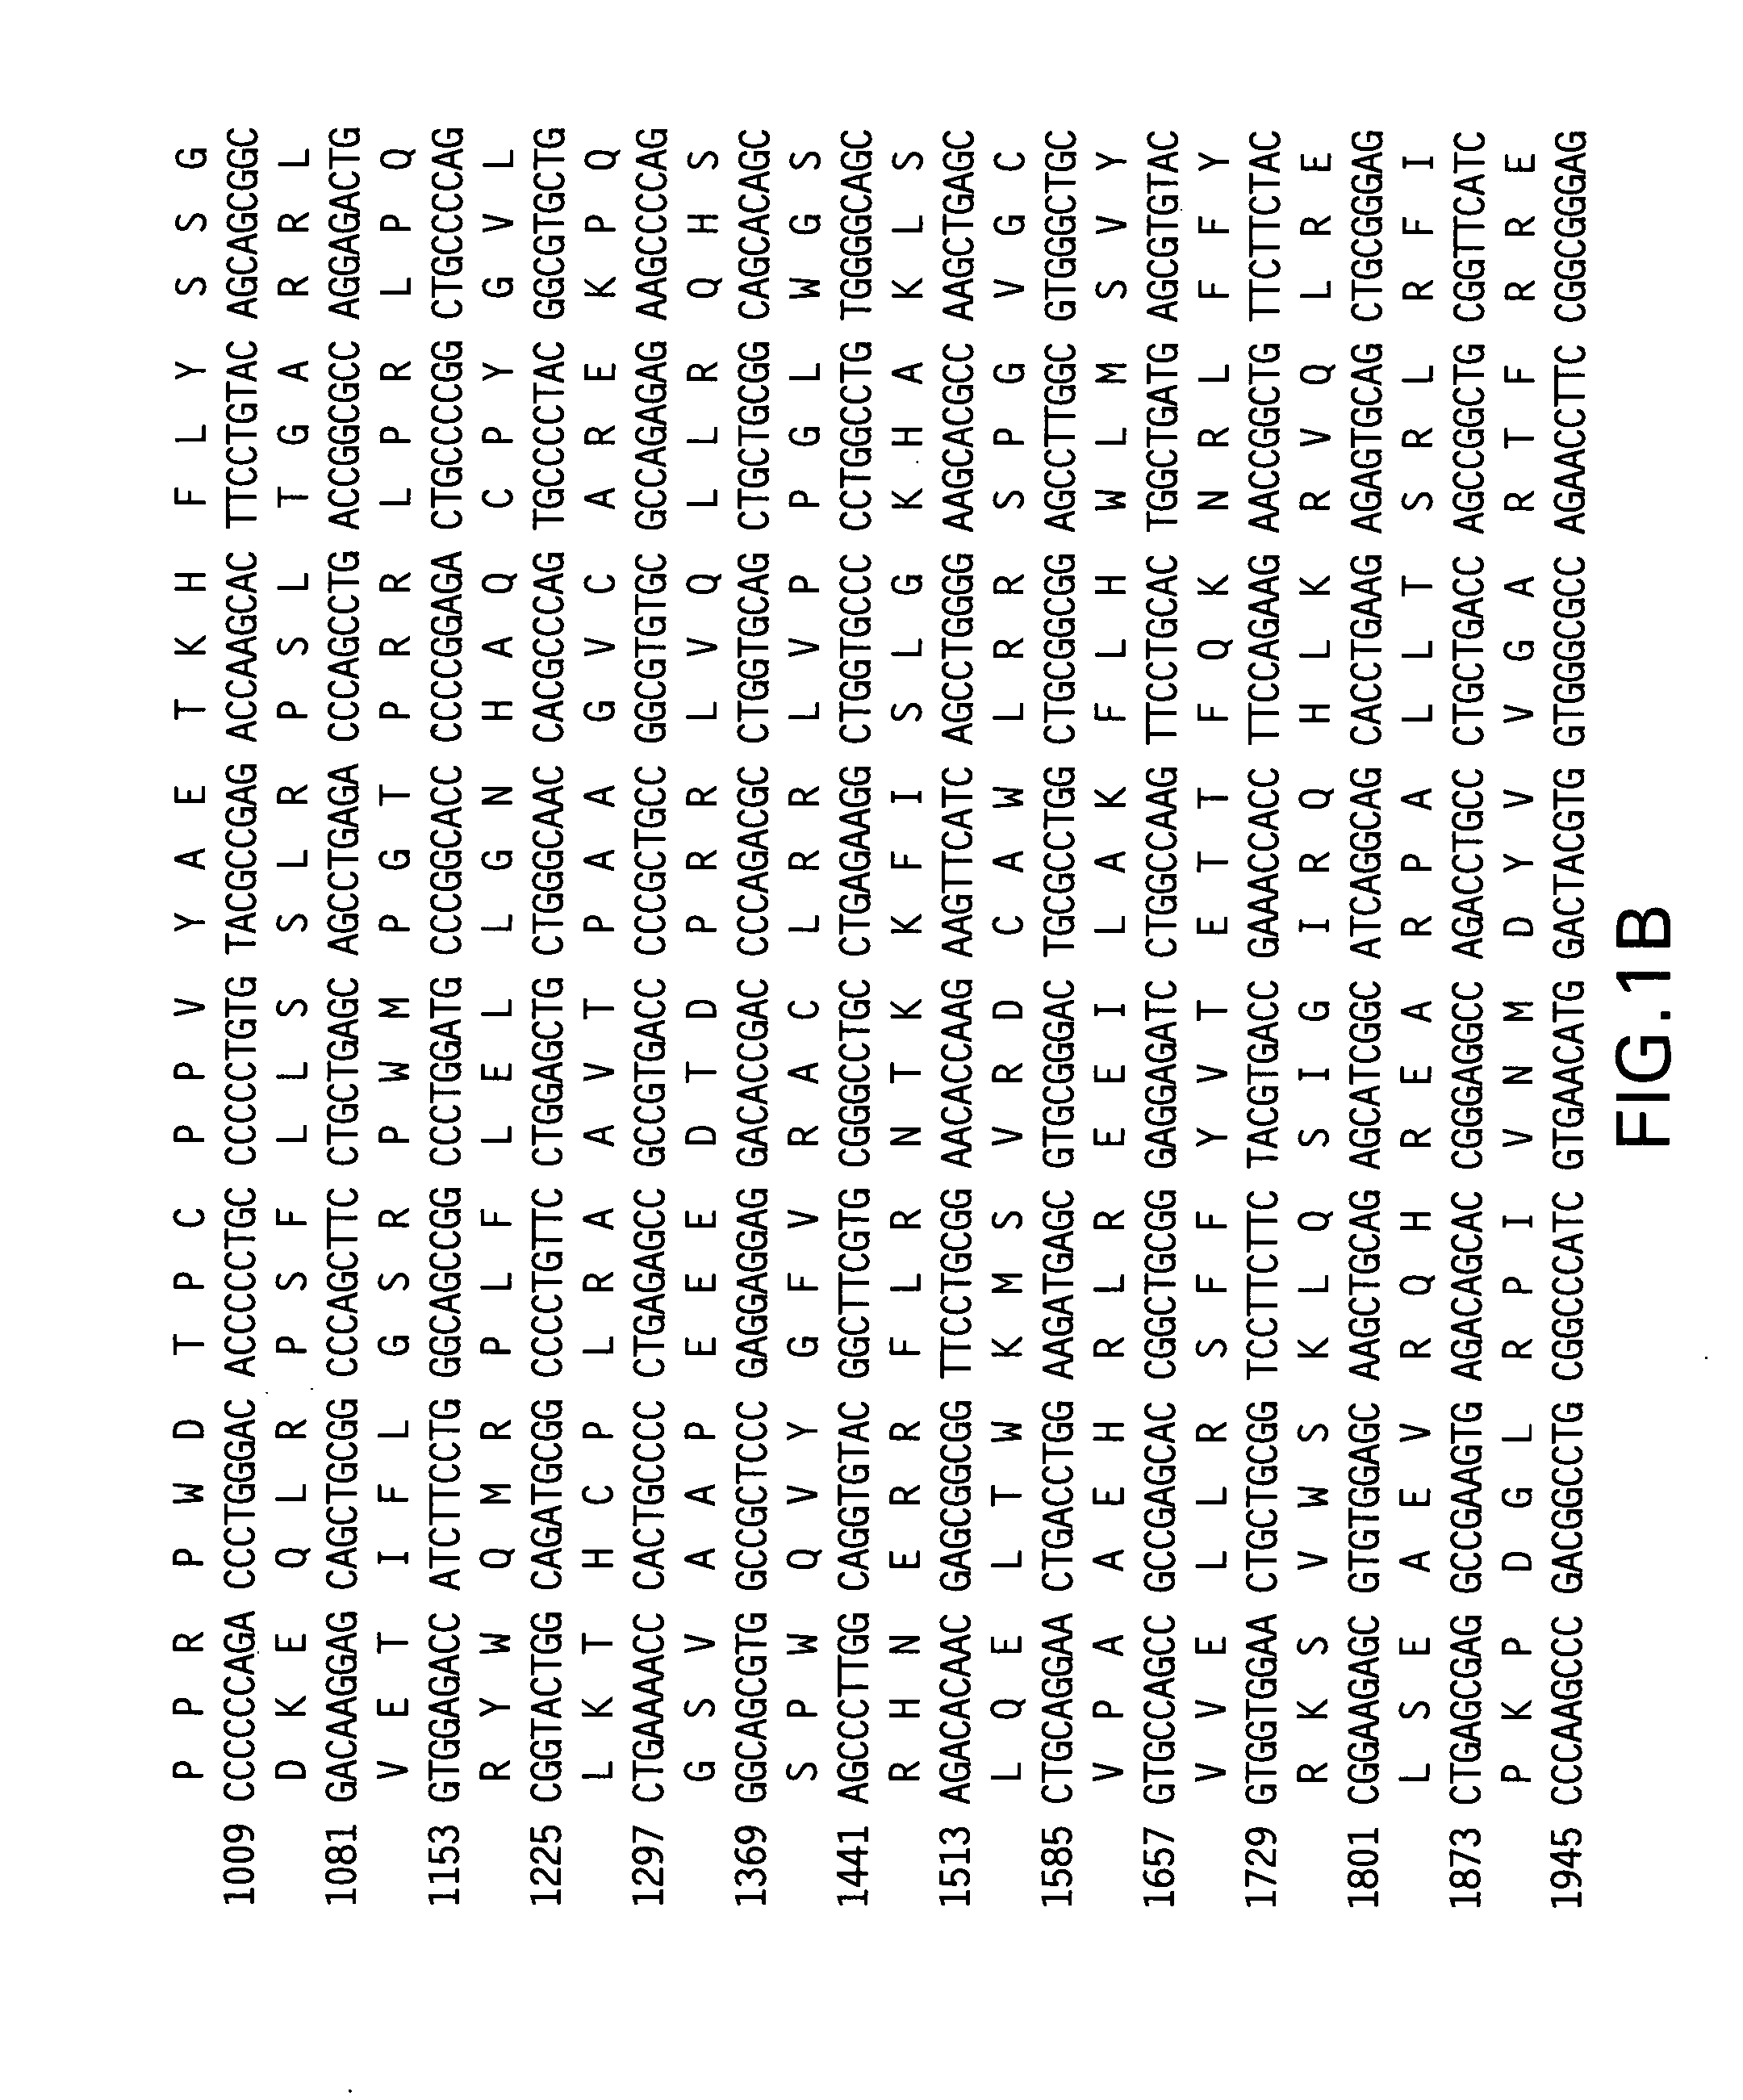 Telomerase reverse transcriptase fusion protein, nucleotides encoding it, and uses thereof